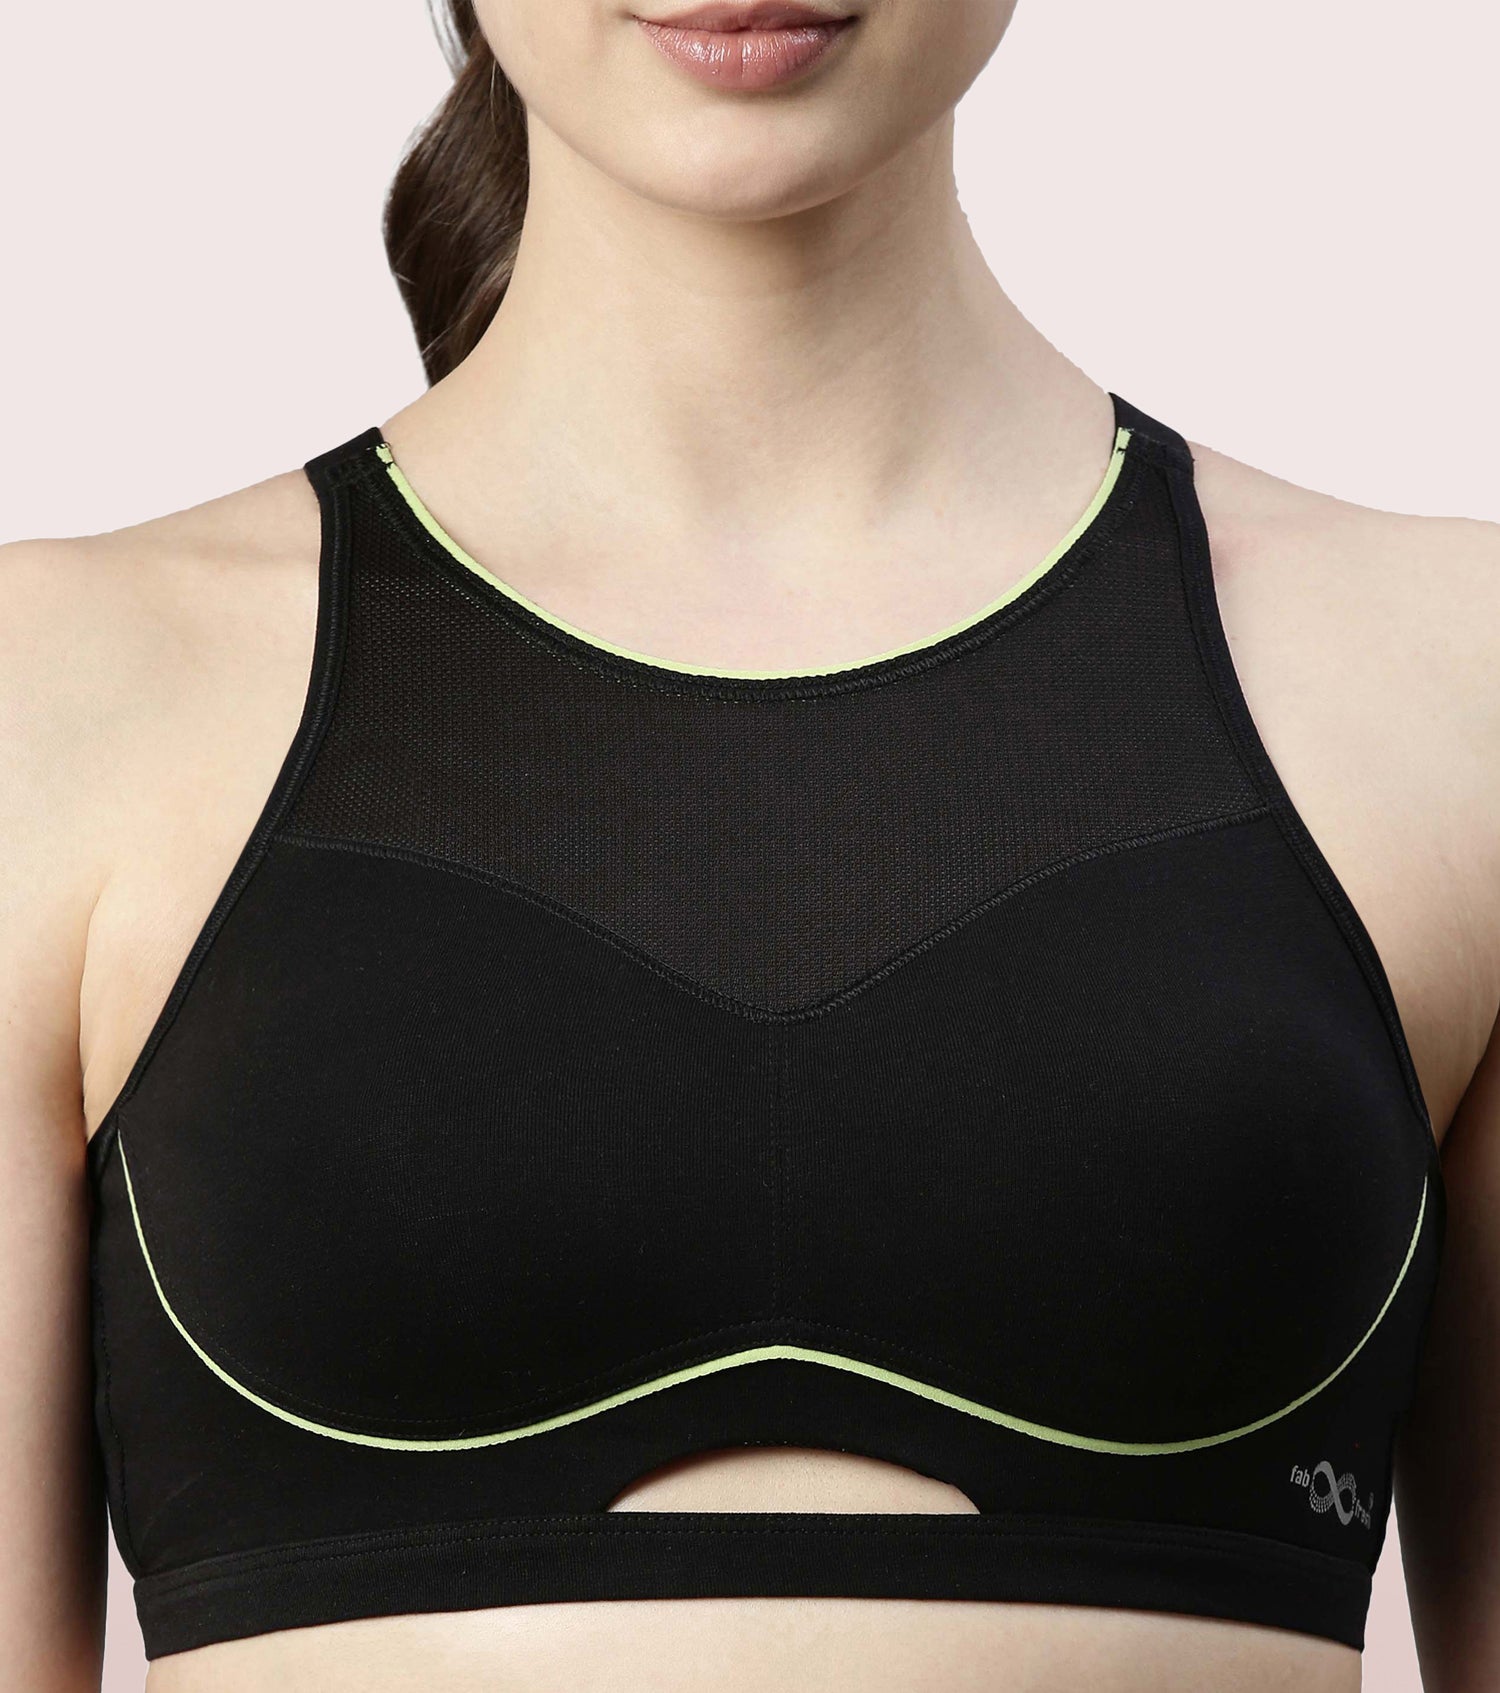 Bravacious on X: This just arrived!! We love colourful sports bra